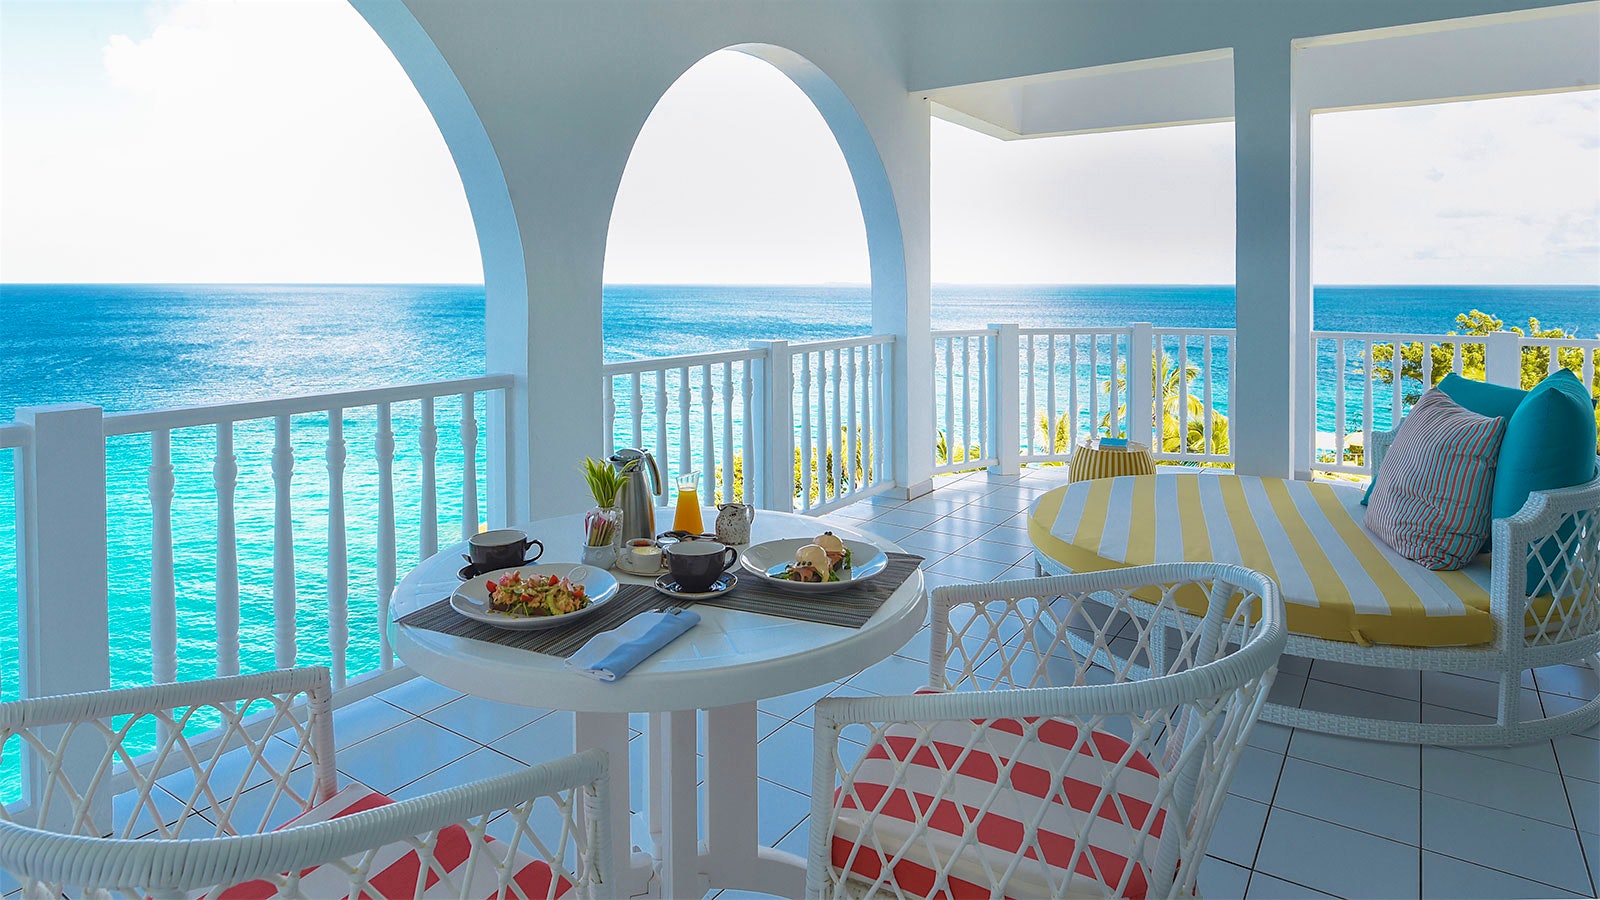  A set table on a balcony with white walls at Malliouhana Resort, overlooking the Caribbean Sea